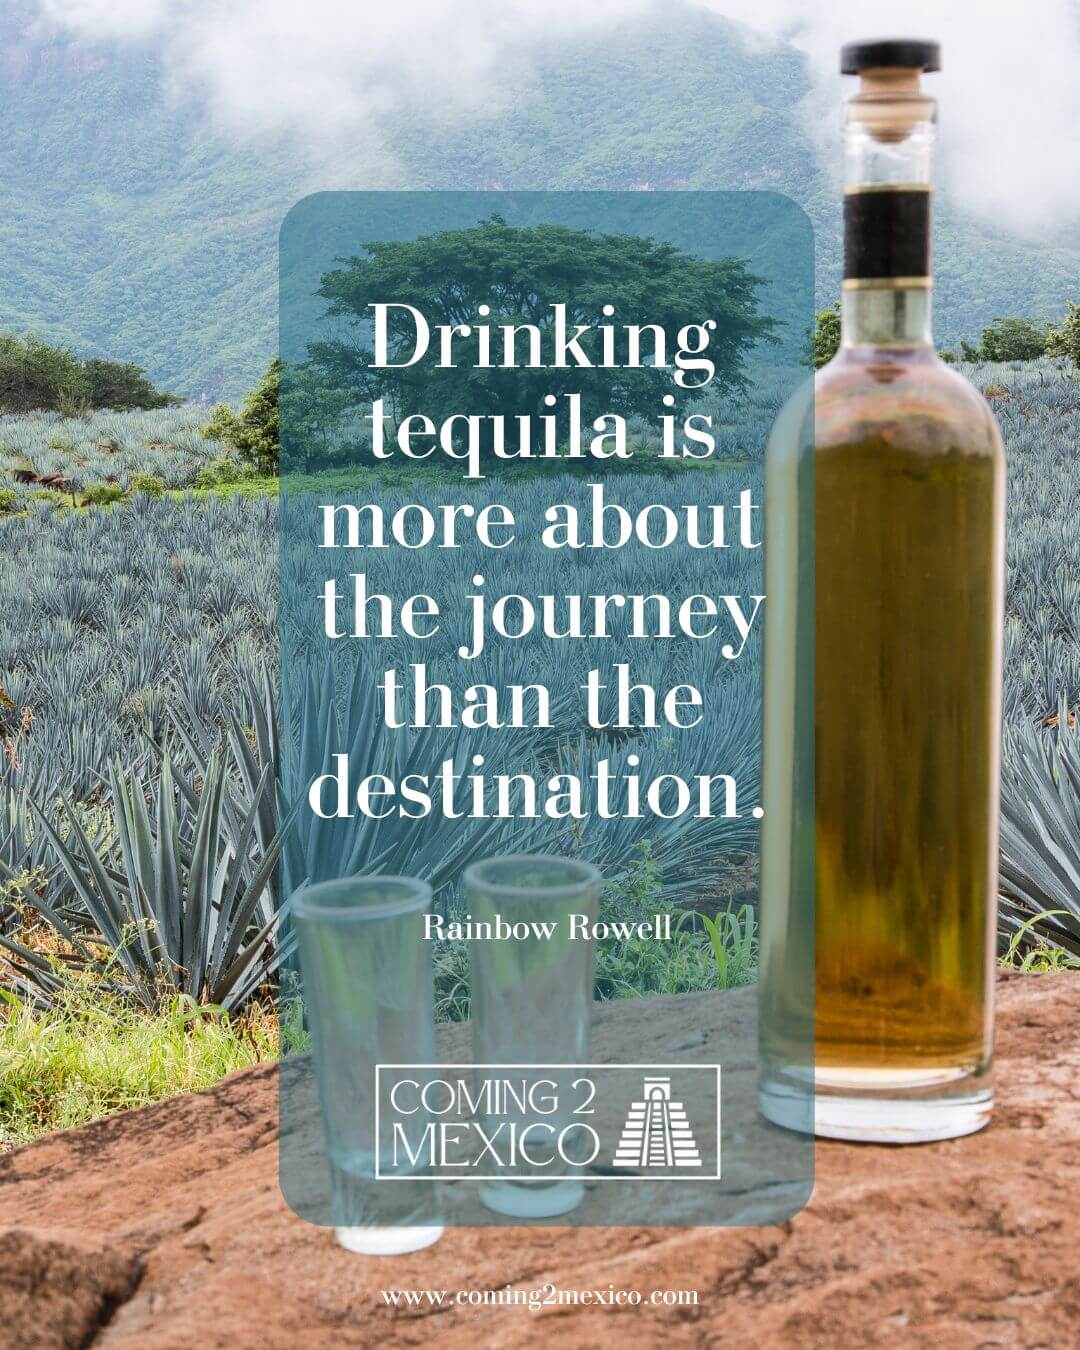 Drinking tequila is more about the journey than the destination.